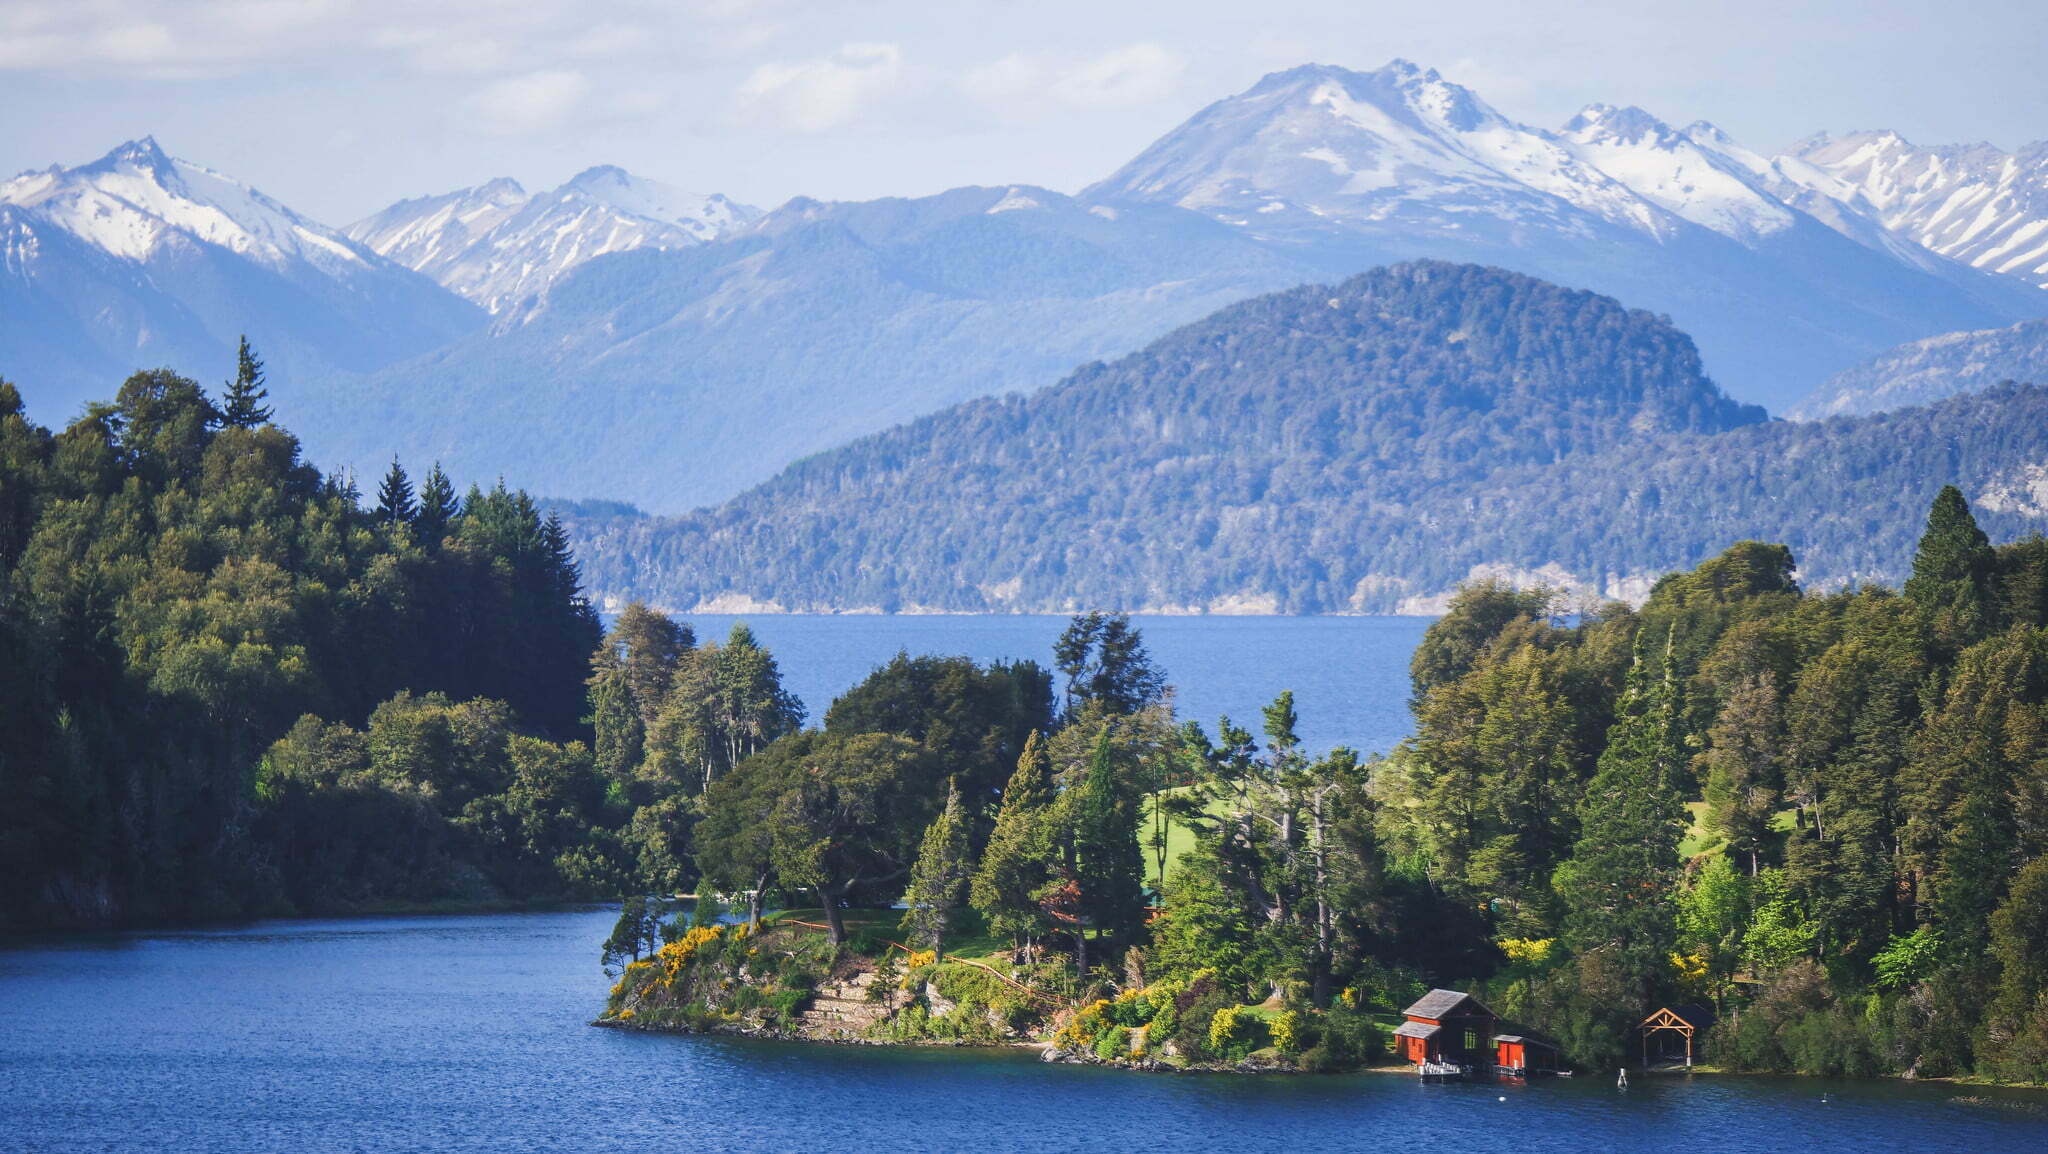 Stunning lake in Bariloche, Argentina with a snow-capped mountain backdrop (Photo by Nomadic Samuel)